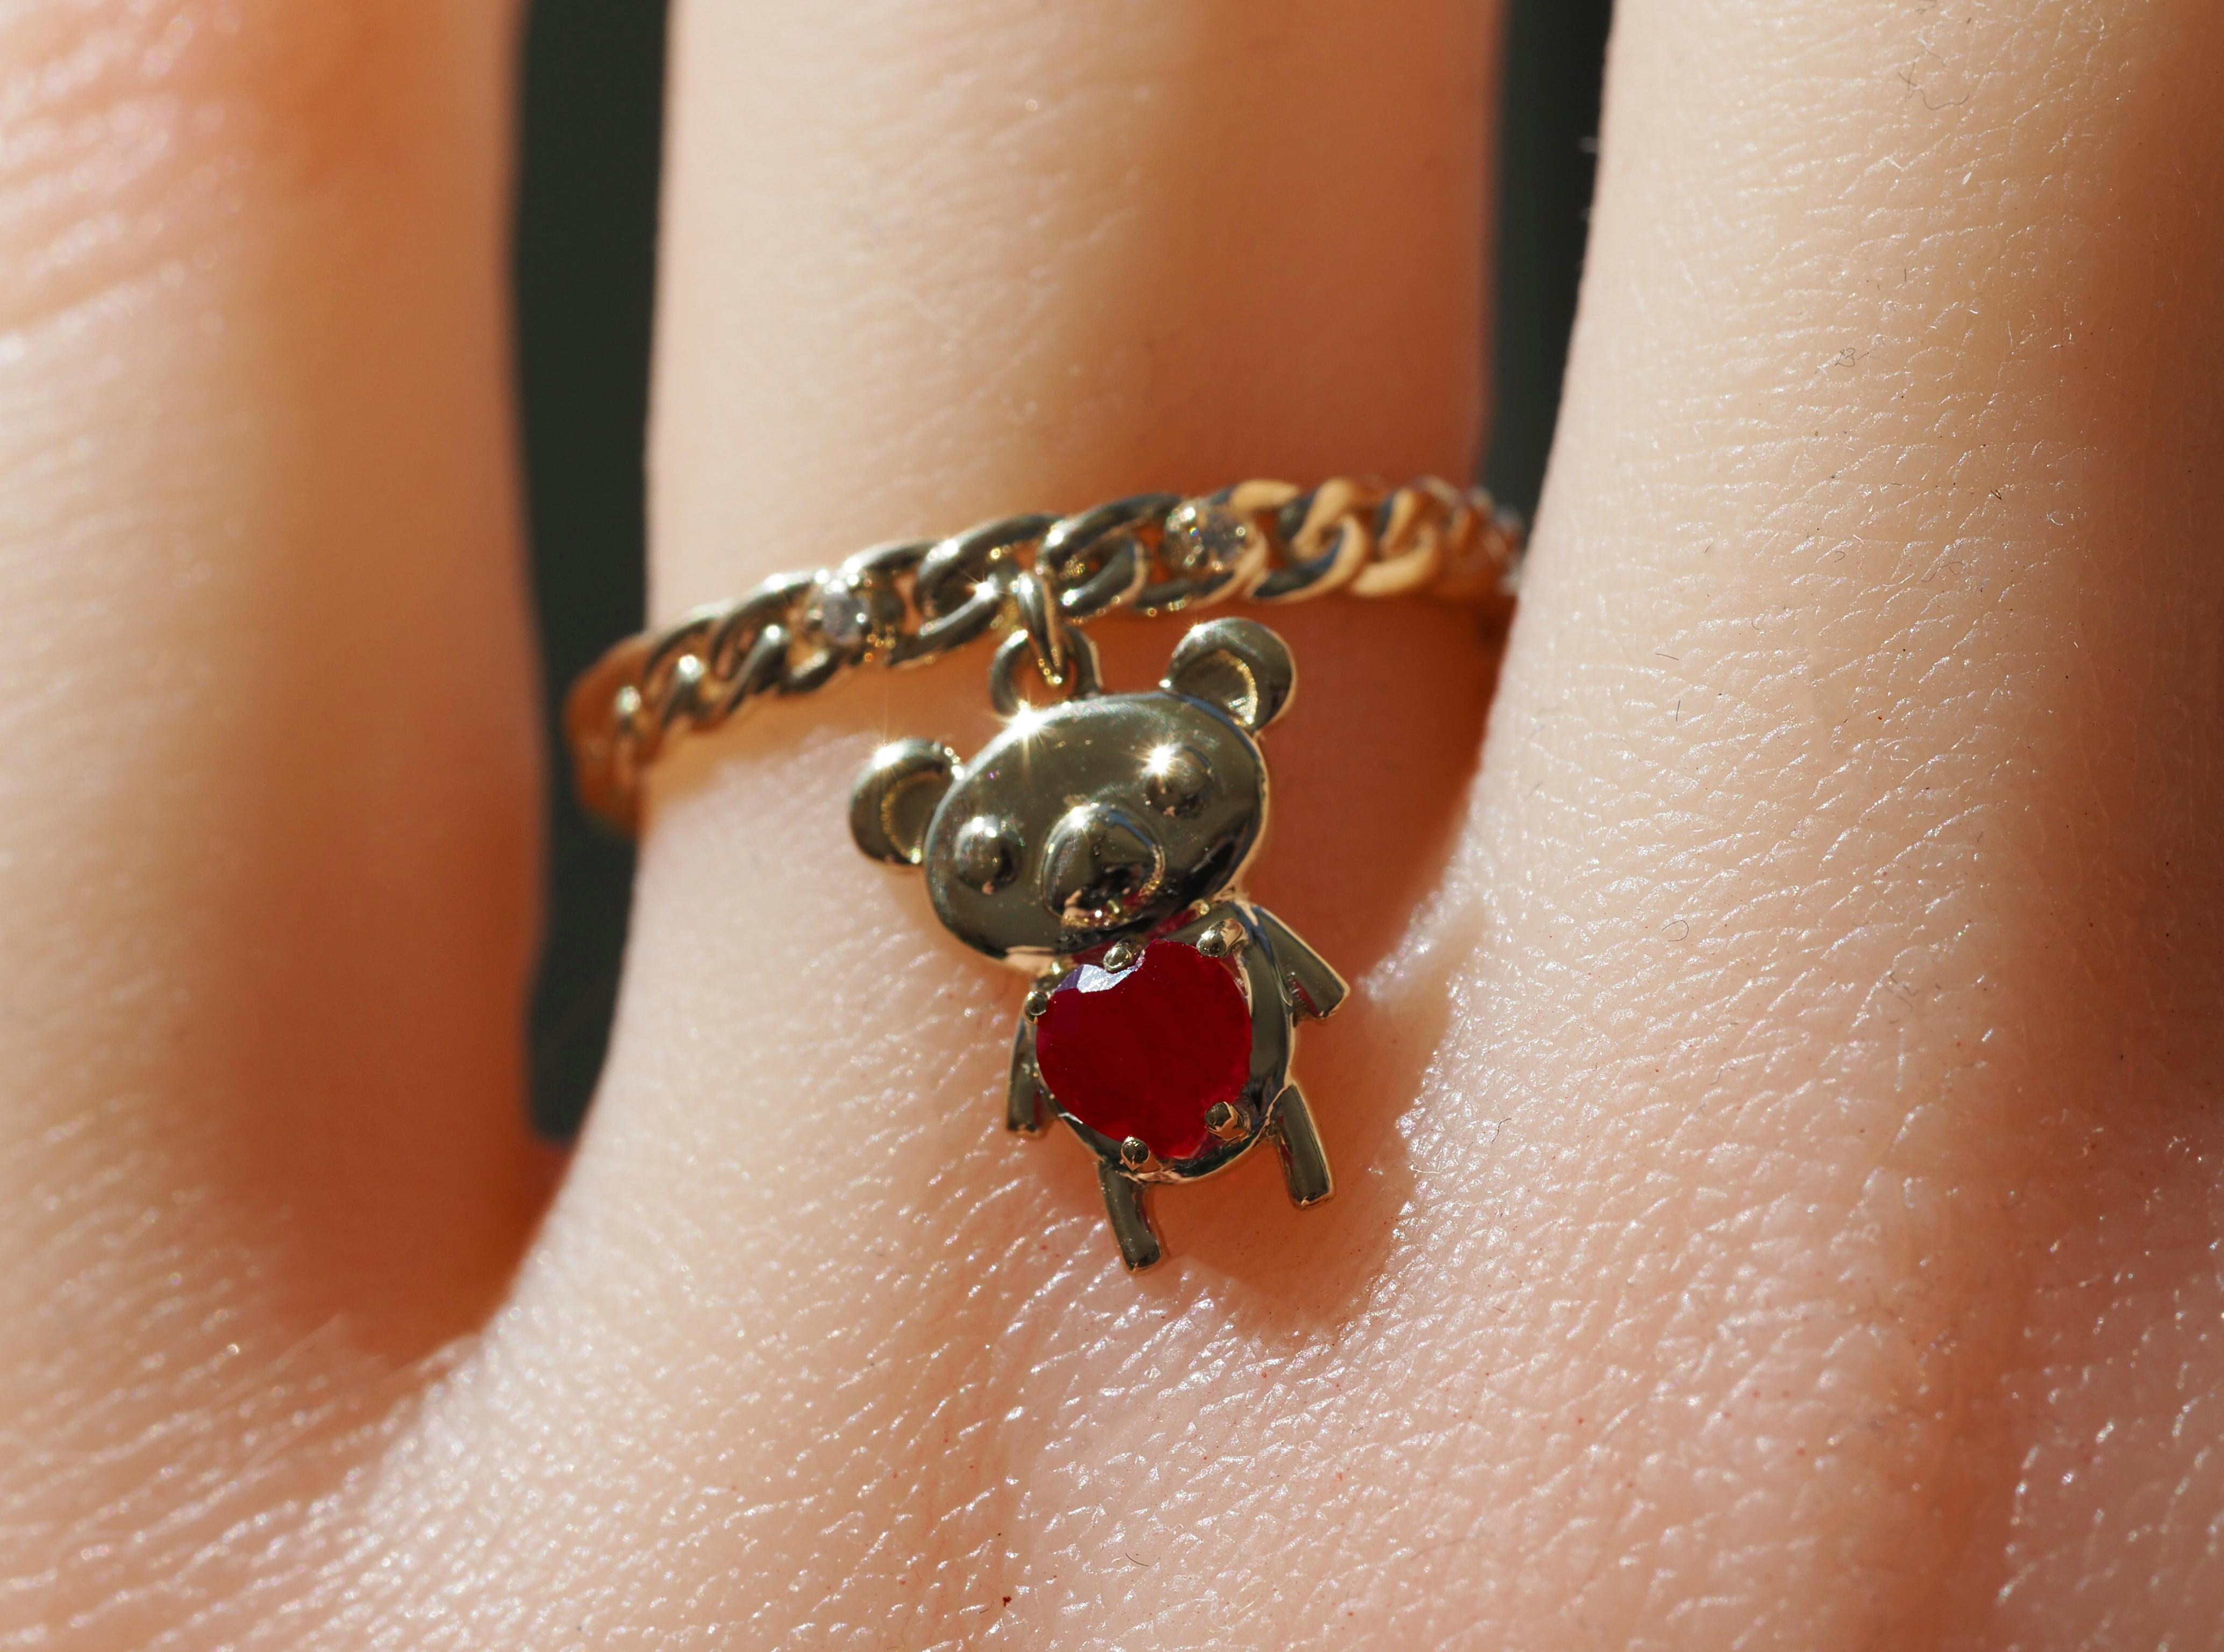 For Sale:  Heart ruby ring in 14 karat gold. Teddy Bear Gold Ring.  6